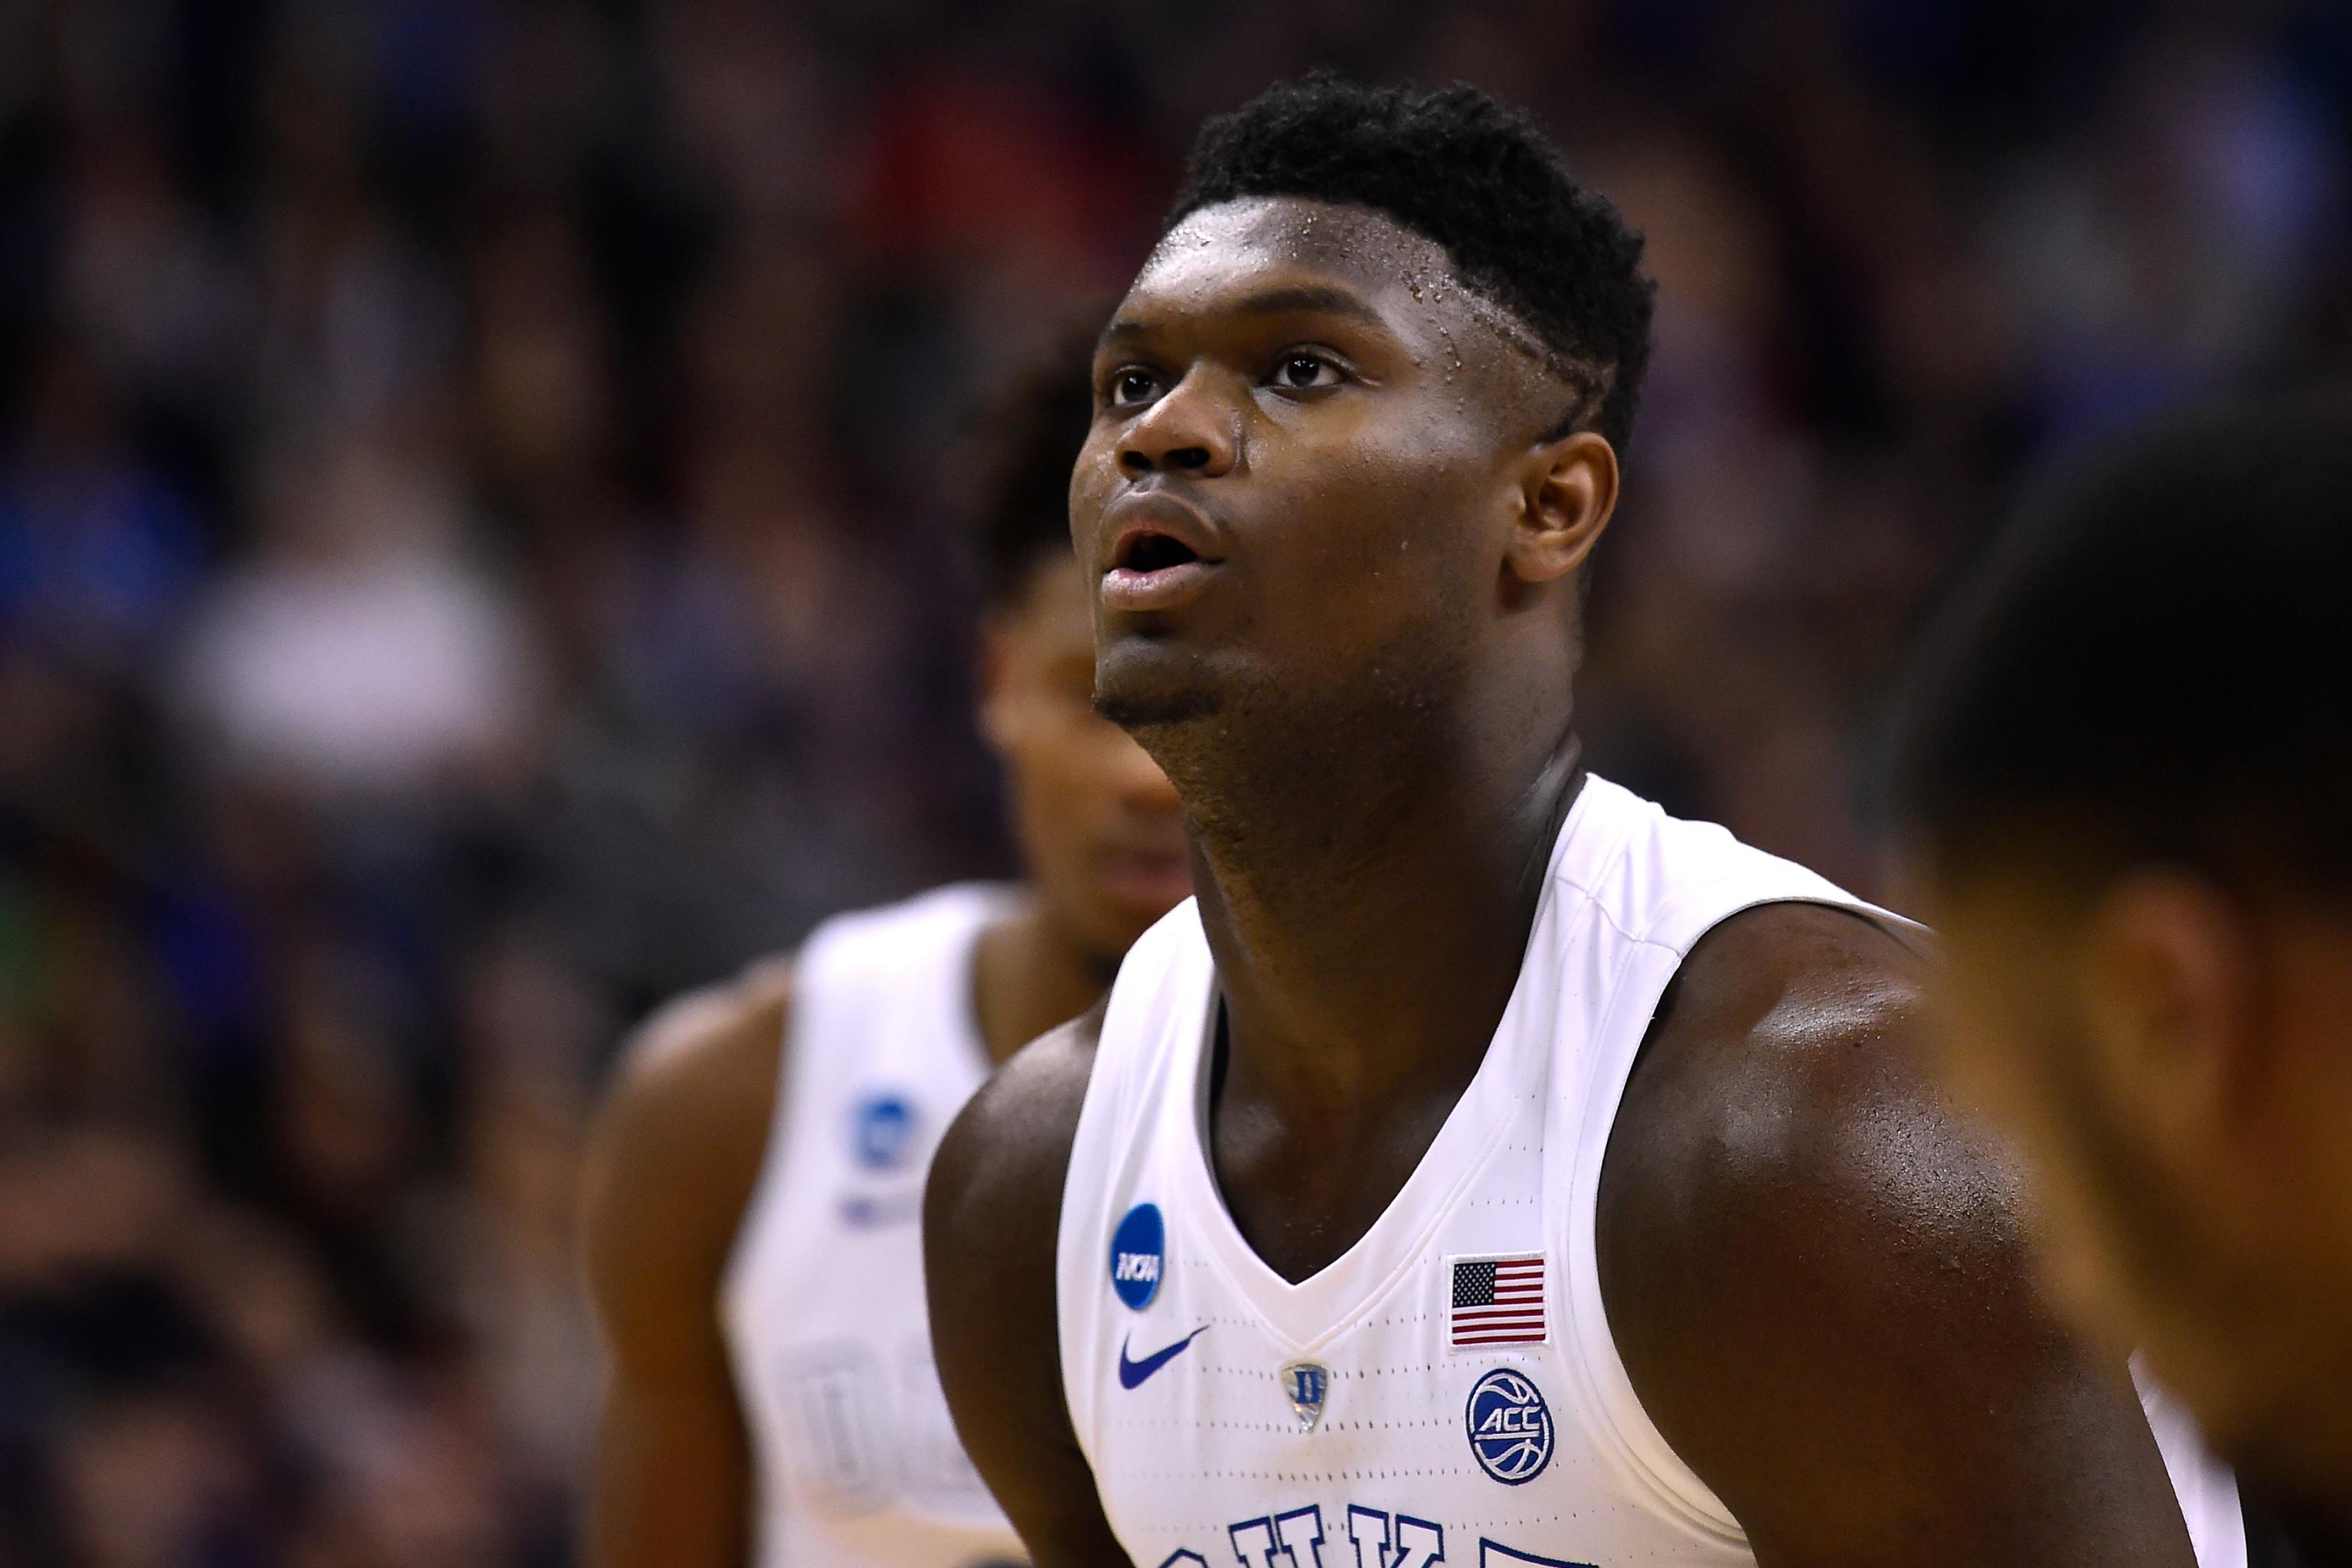 How Zion Williamson Became a Duke Star and Top NBA Prospect